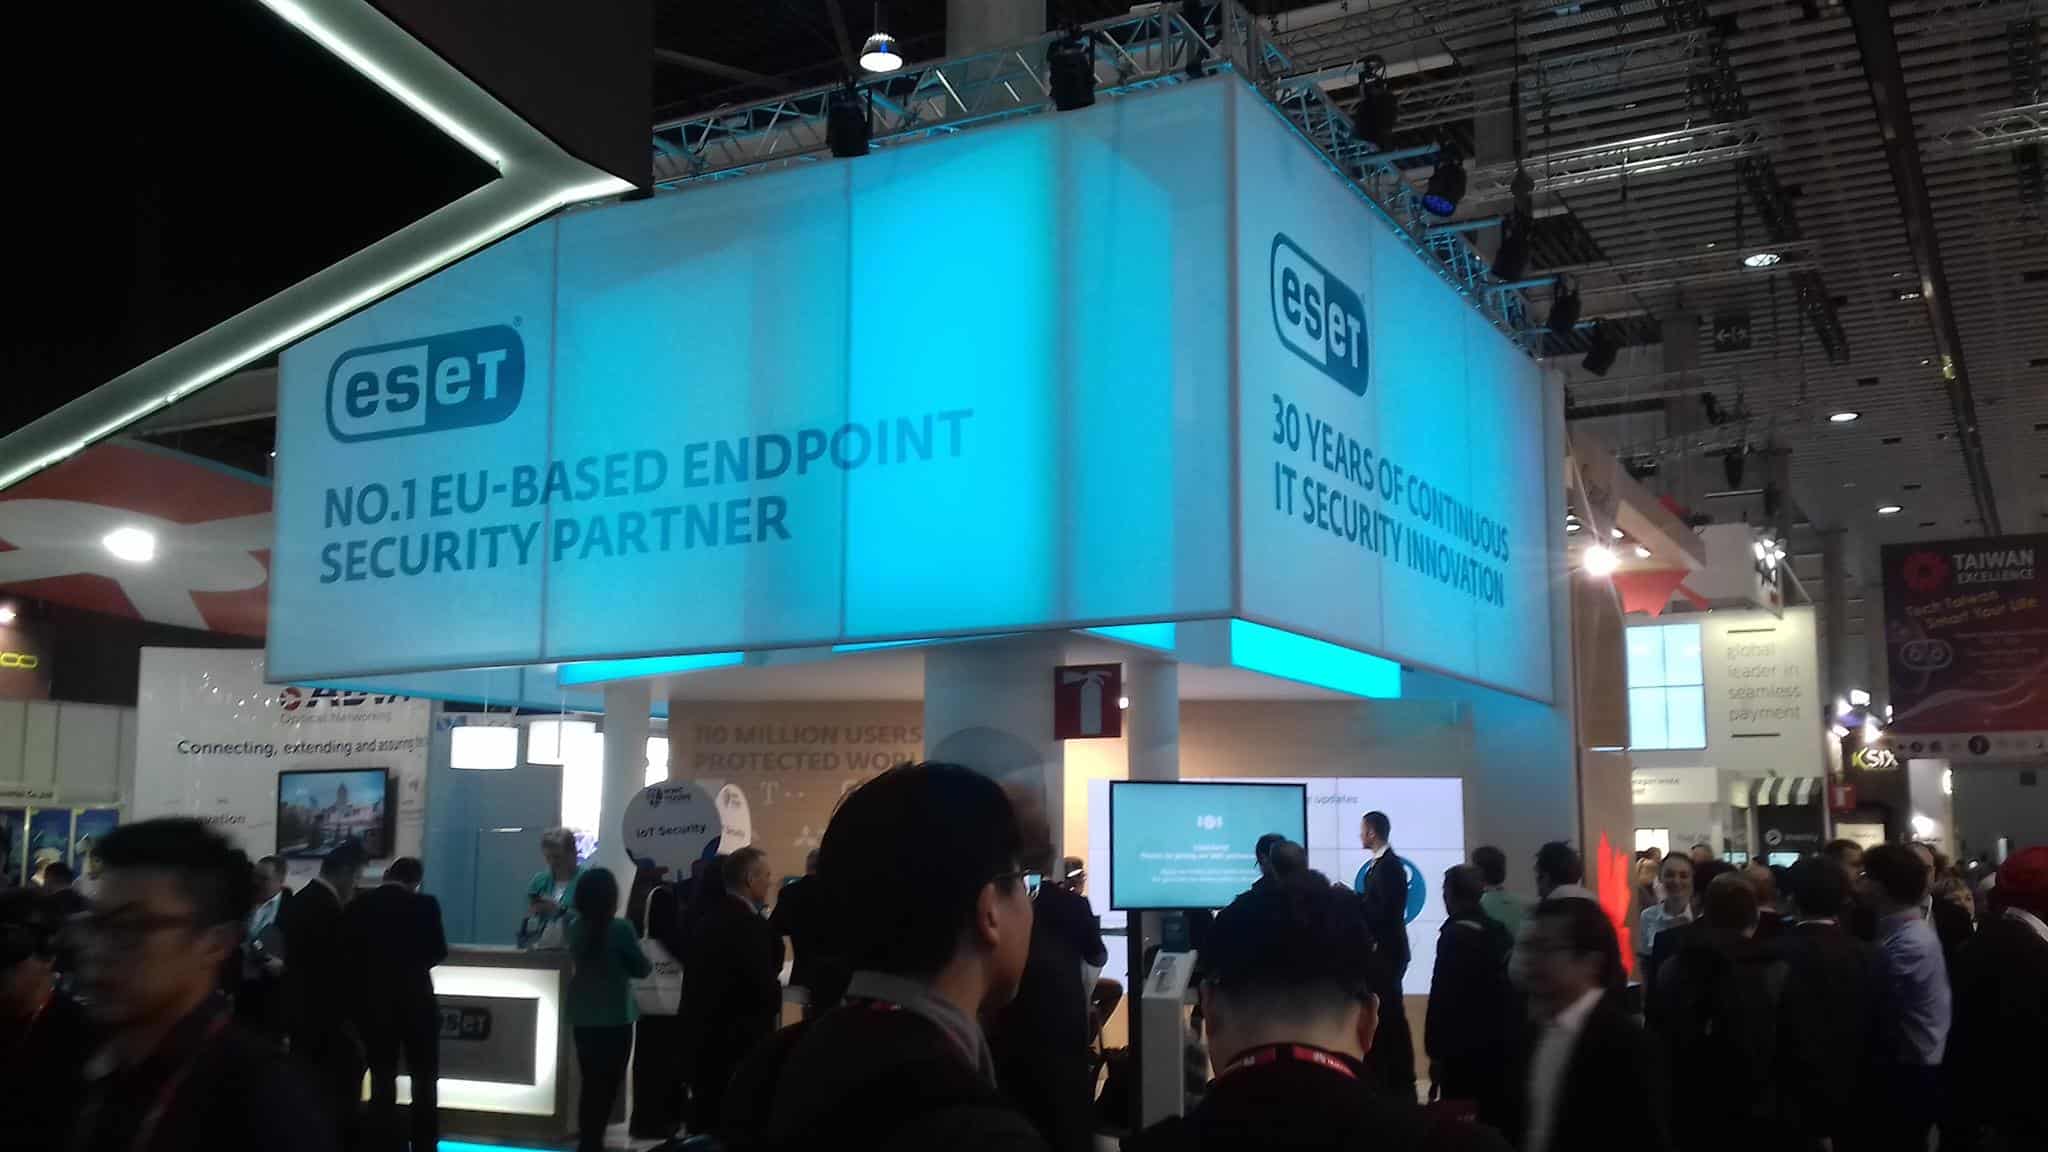 eset stand at MWC 2018